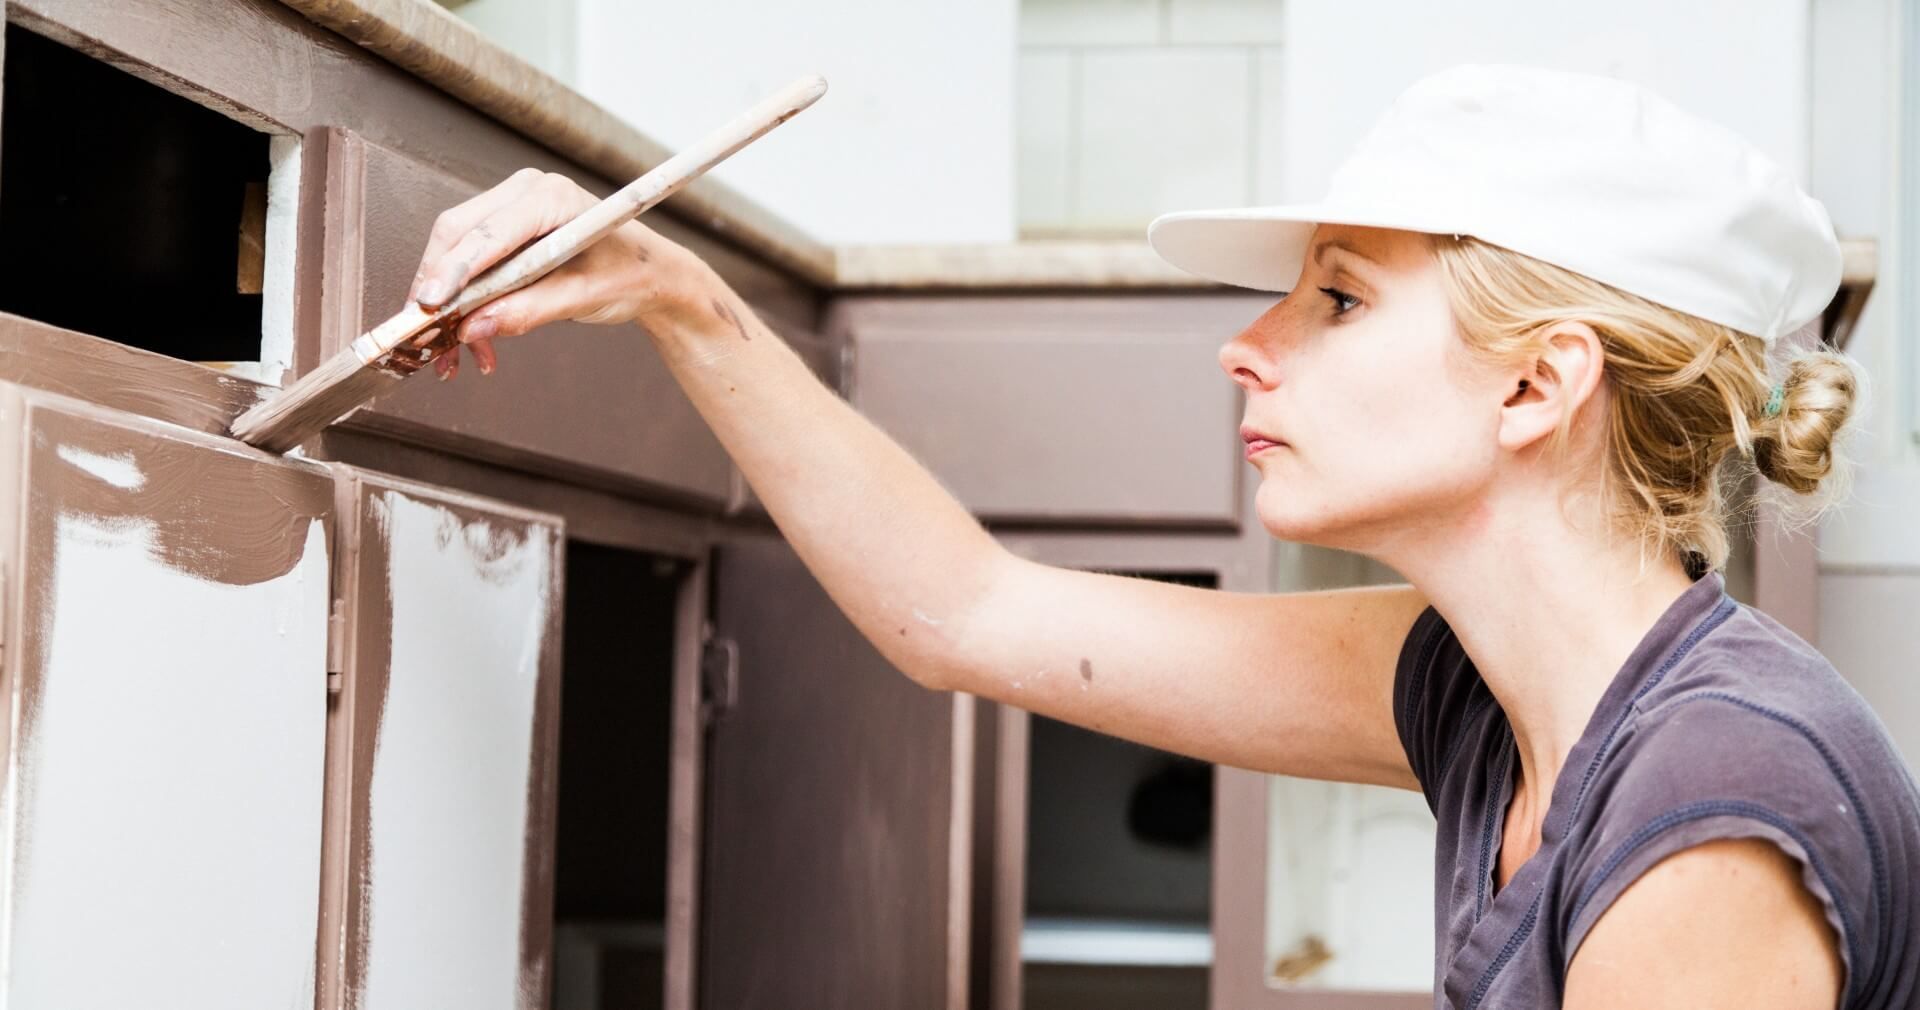 A woman painting her kitchen cabinets to give her kitchen a newer and fresher look